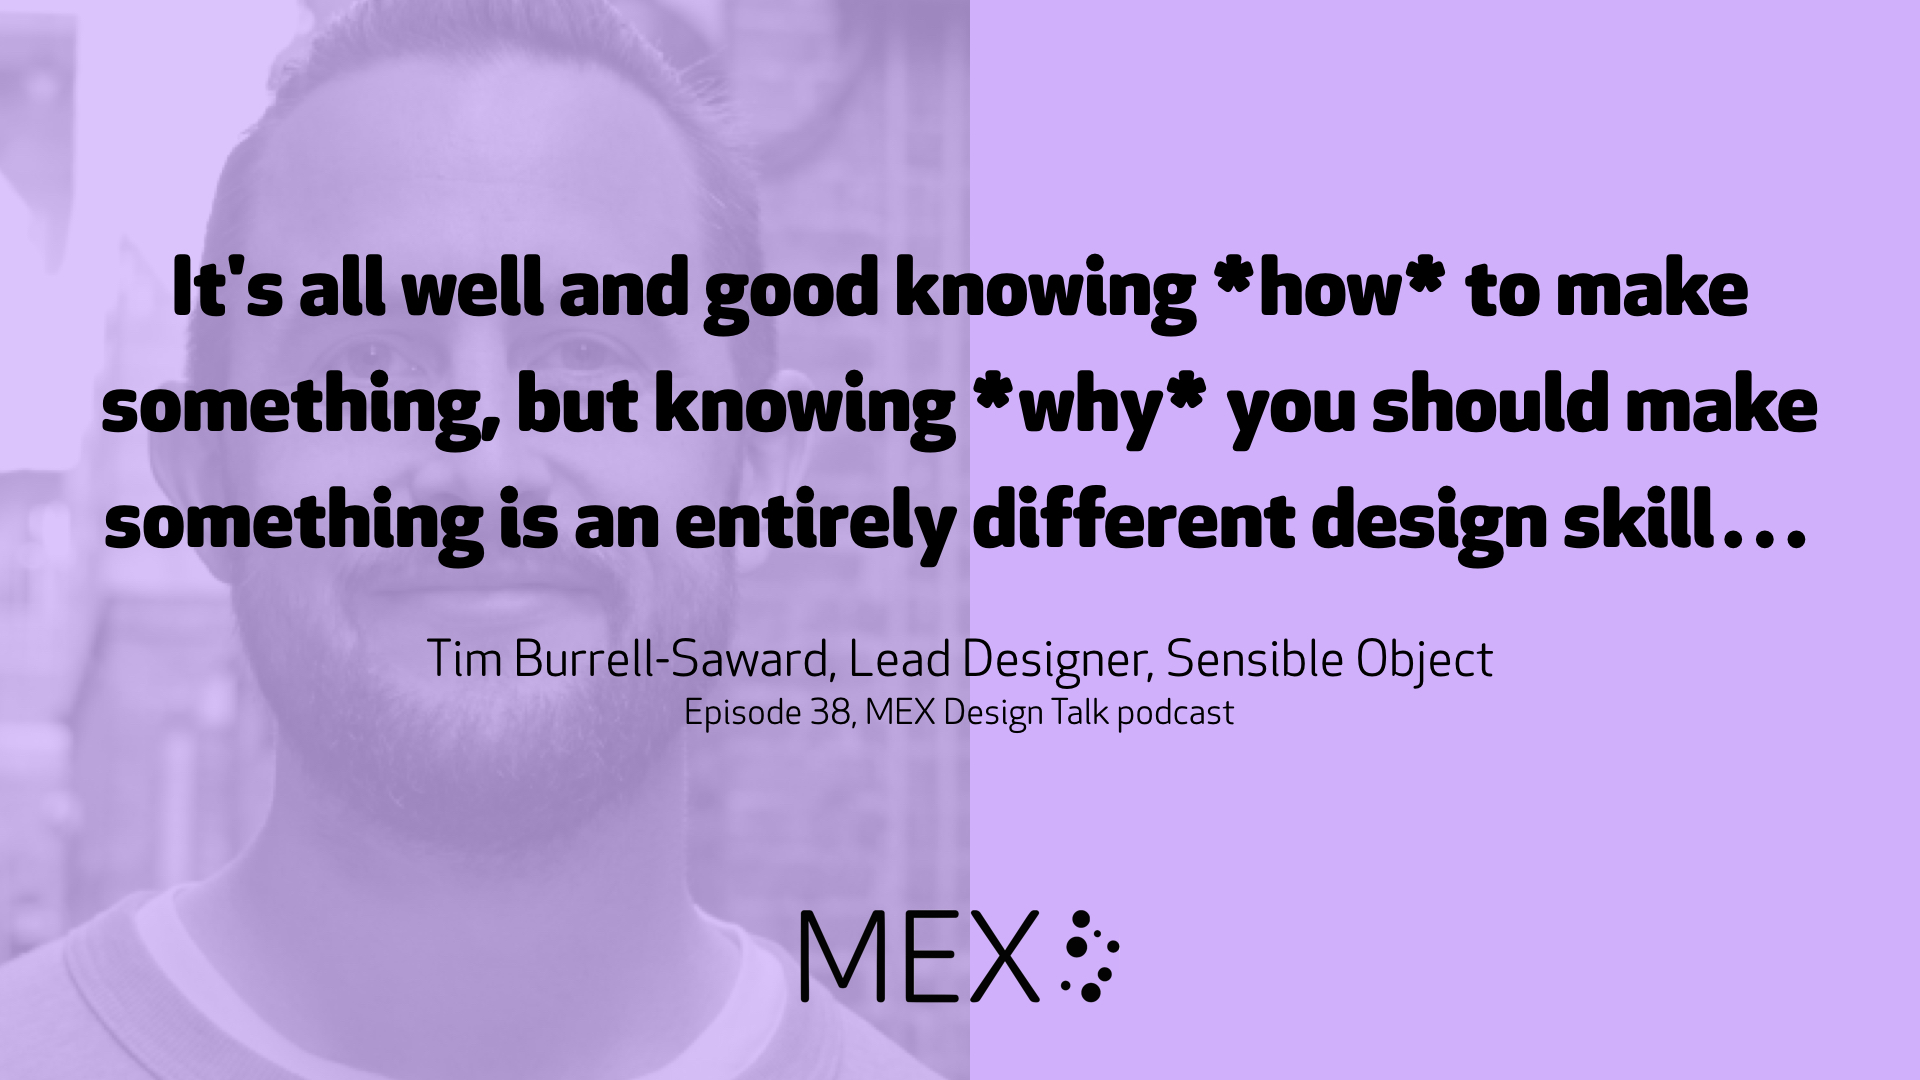 It's all well and good knowing *how* to make something, but knowing *why* you should make something is an entirely different design skill… Tim Burrell-Saward, Lead Designer, Sensible Object Episode 38, MEX Design Talk podcast